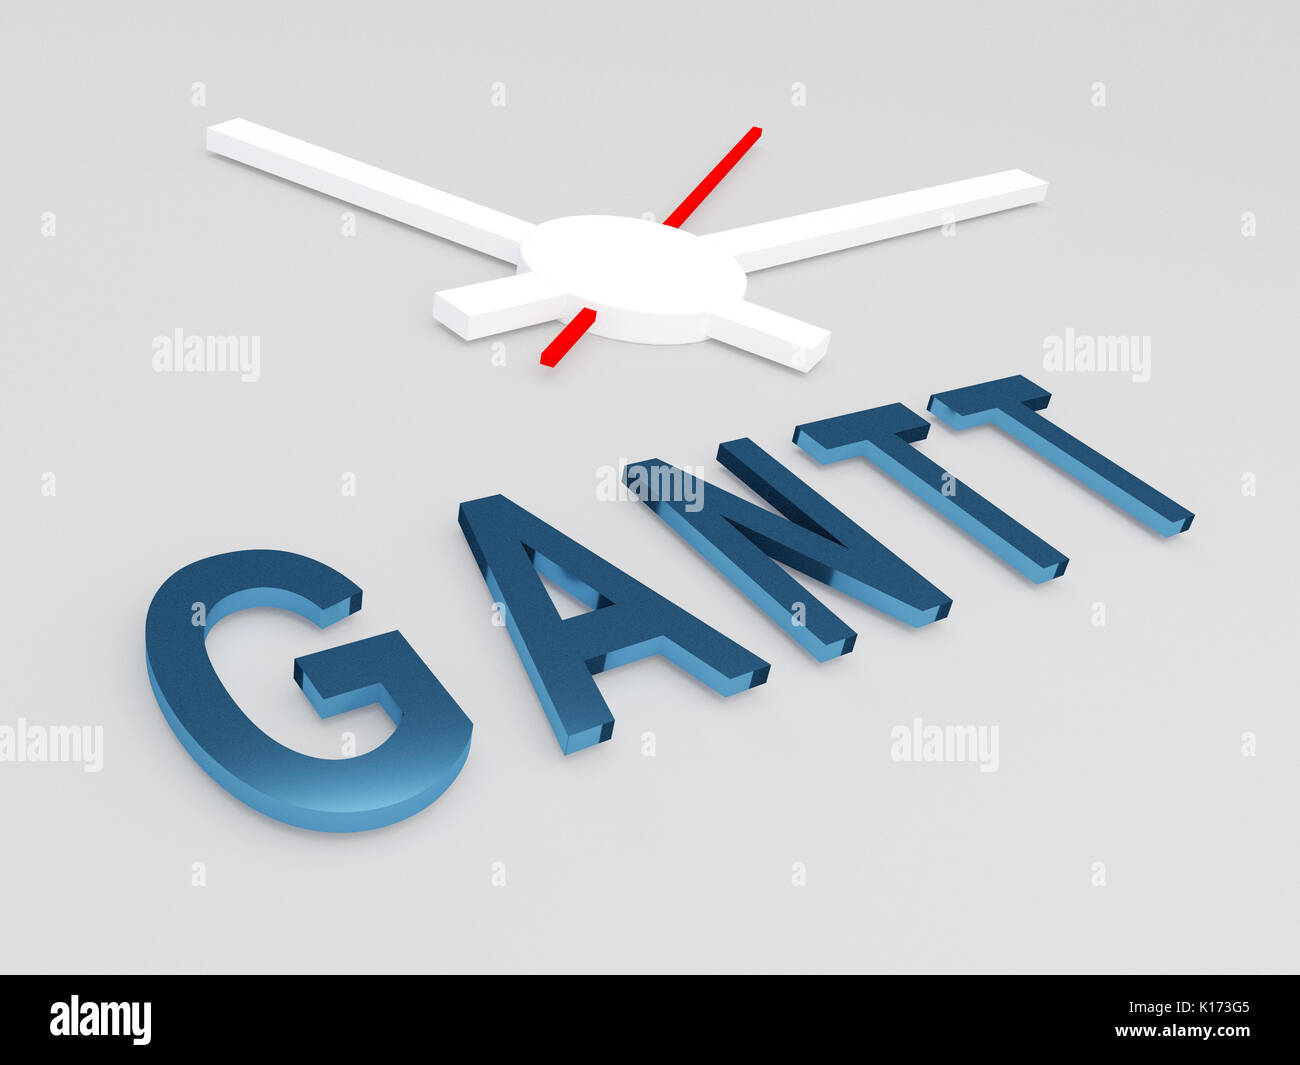 3D illustration of 'GANTT' title with a clock as a background Stock Photo